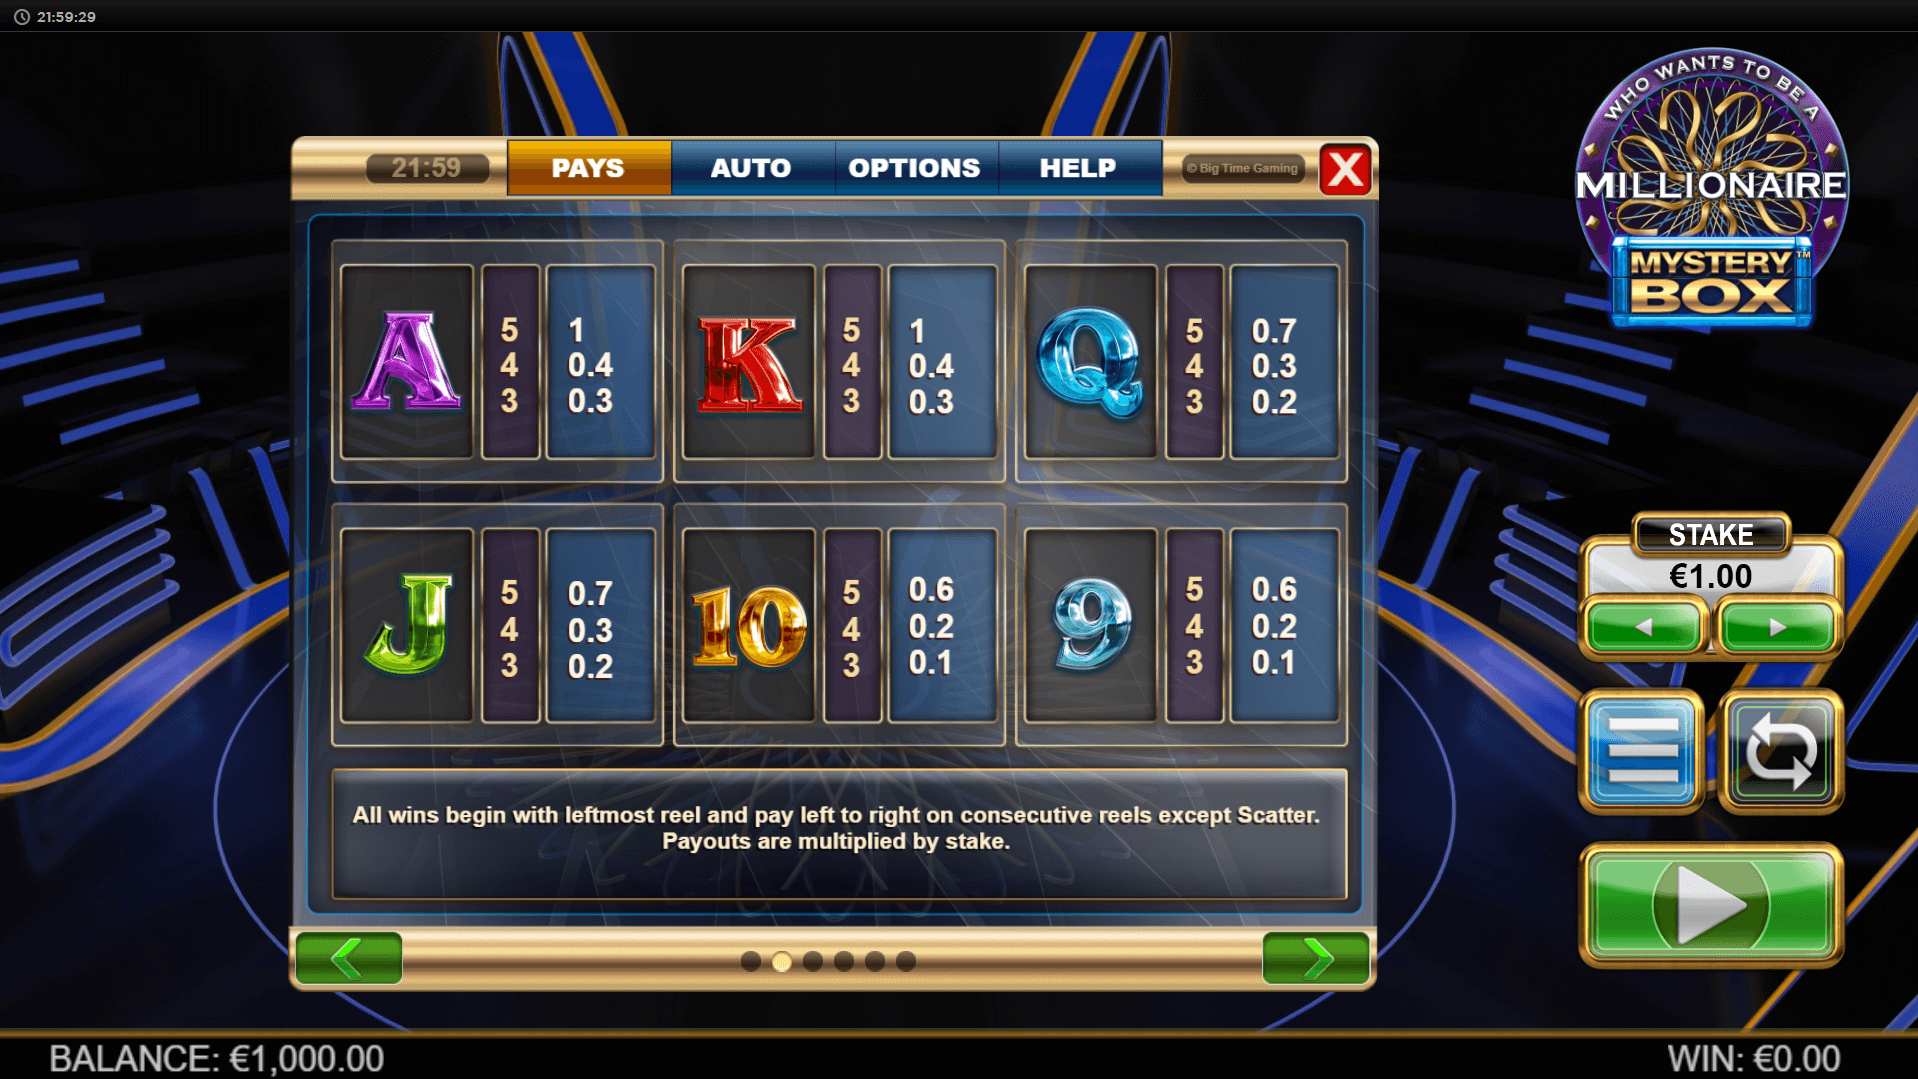 who wants to be a millionaire: mystery box slot machine detail image 1